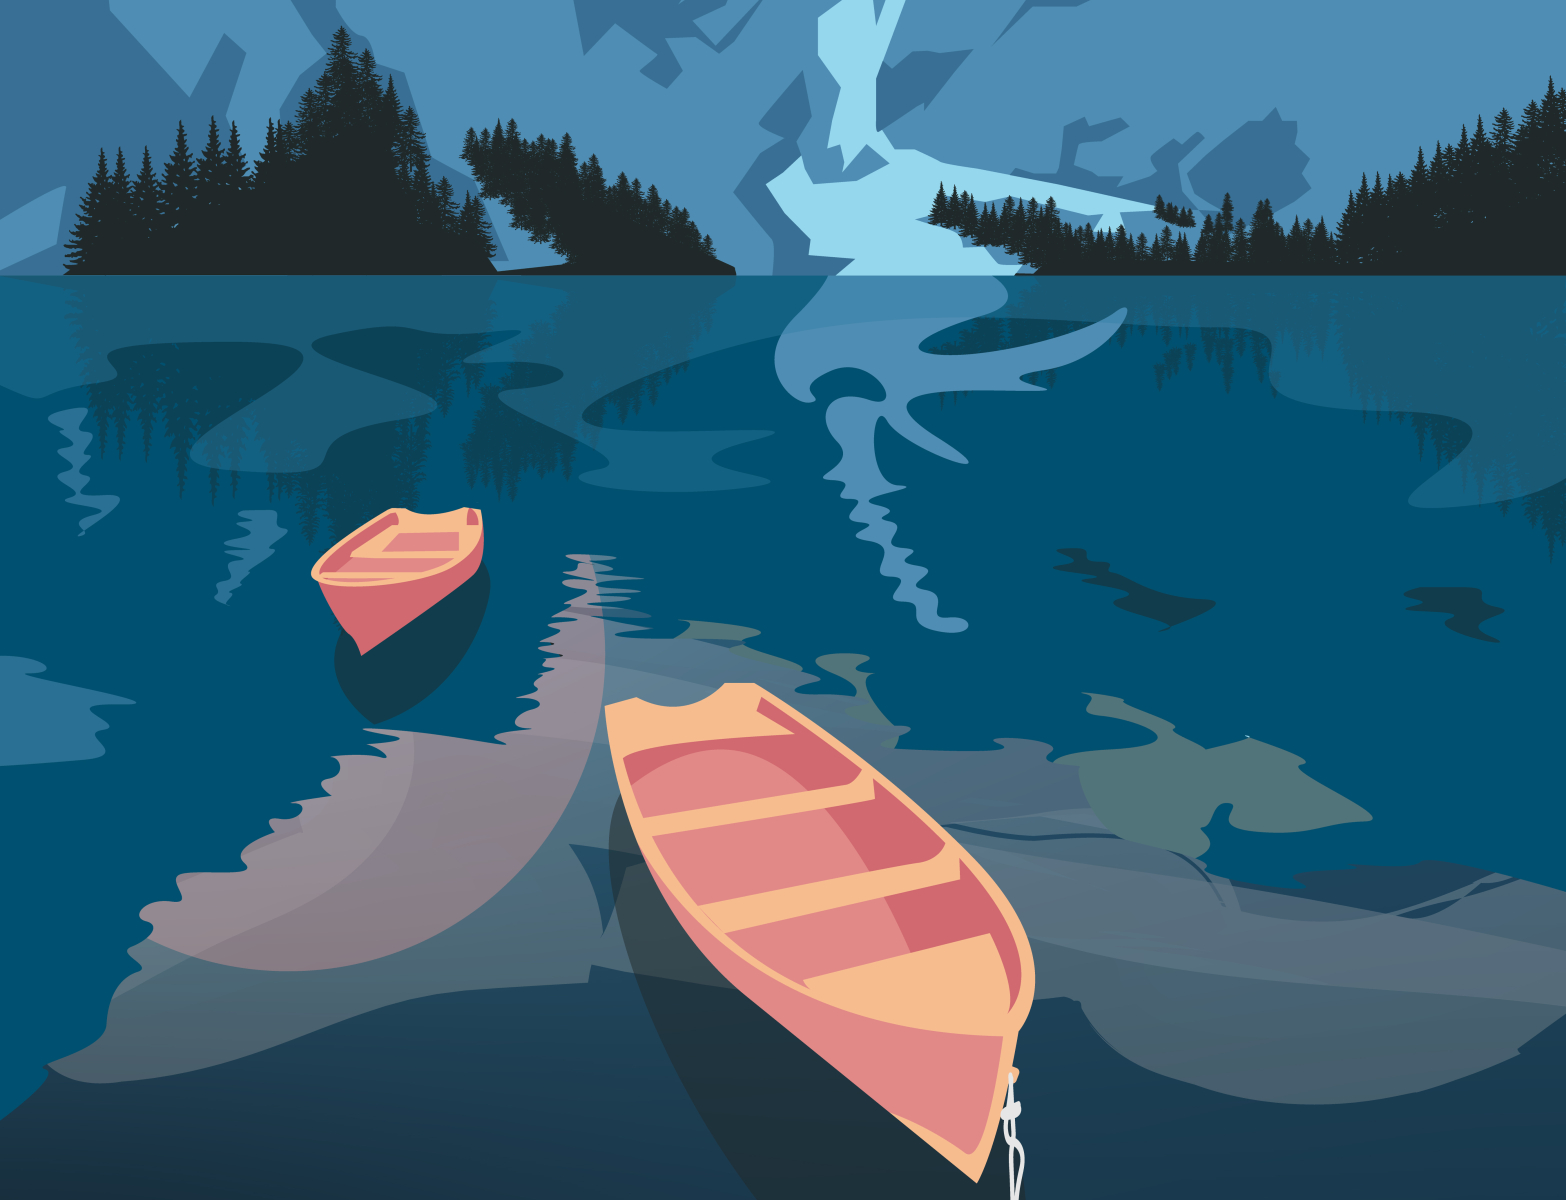 Lake in Canada Illustration by Eesgram by Elias Serrano on Dribbble